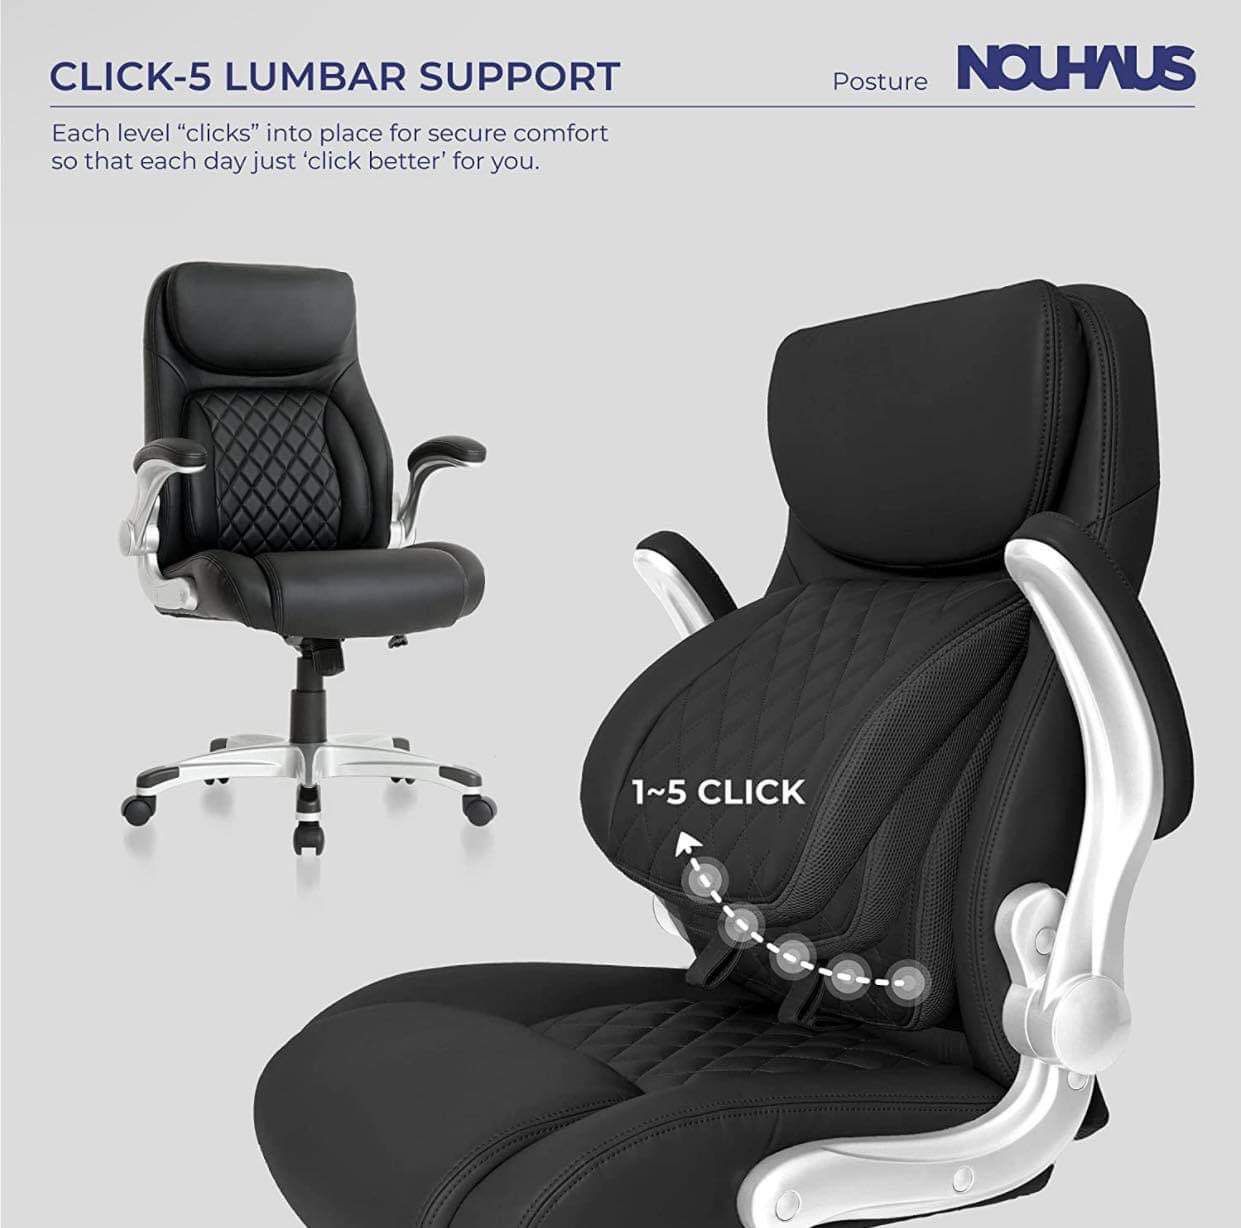 BRAND NEW🔥🔥🔥 NOUHAUS +Posture Ergonomic PU Leather Office Chair. Click5 Lumbar Support with FlipAdjust Armrests. Modern Executive Chair and Compute